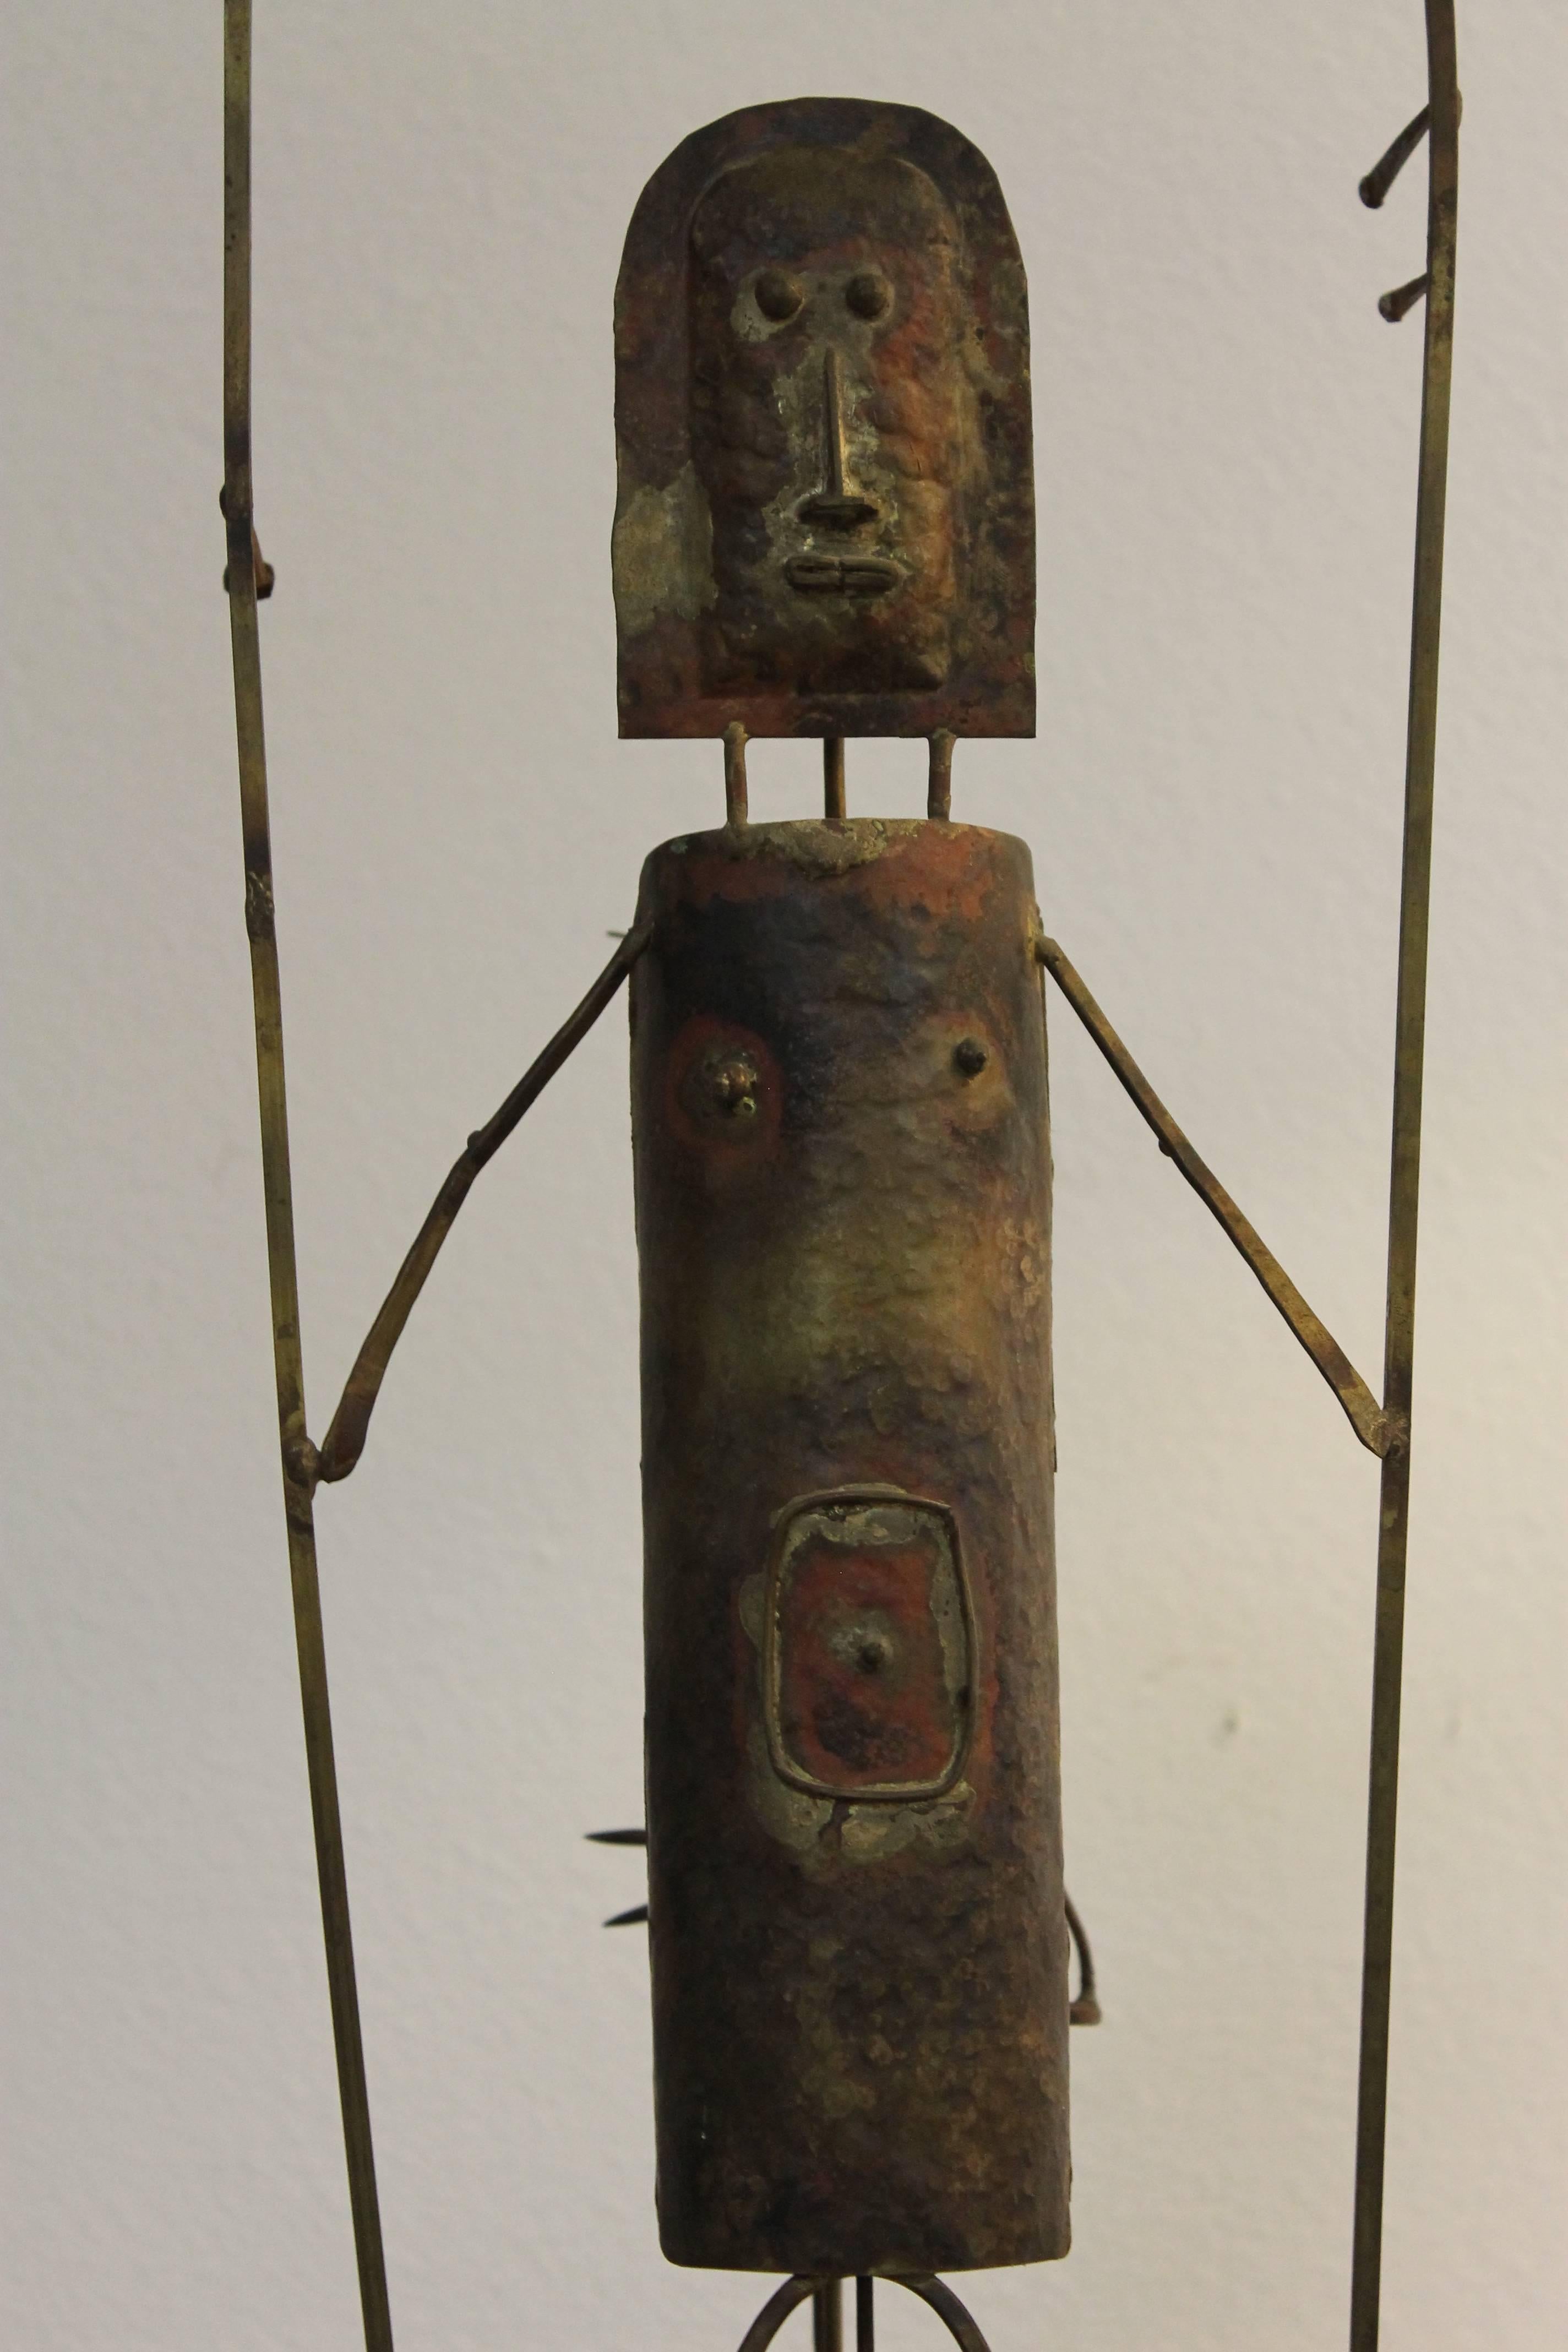 Whimsical assemblage titled Hitch Hiker by Carter Gibson. Looks like a burning man assemblage. Sculpture is 21.25